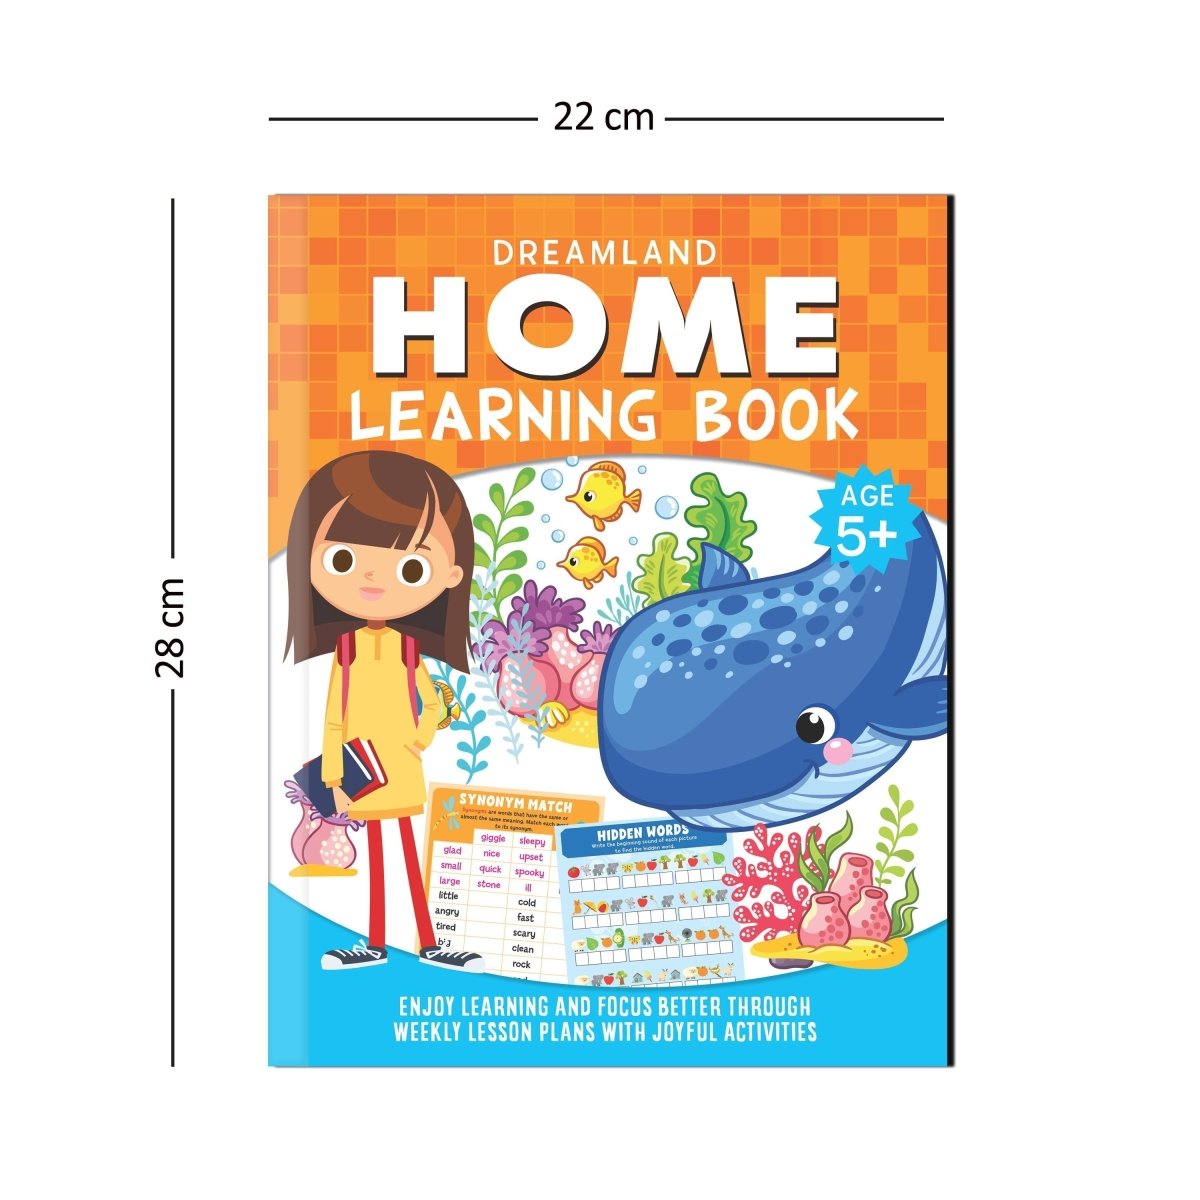 Dreamland Publications Home Learning Book With Joyful Activities - 5+ - 9789389281309